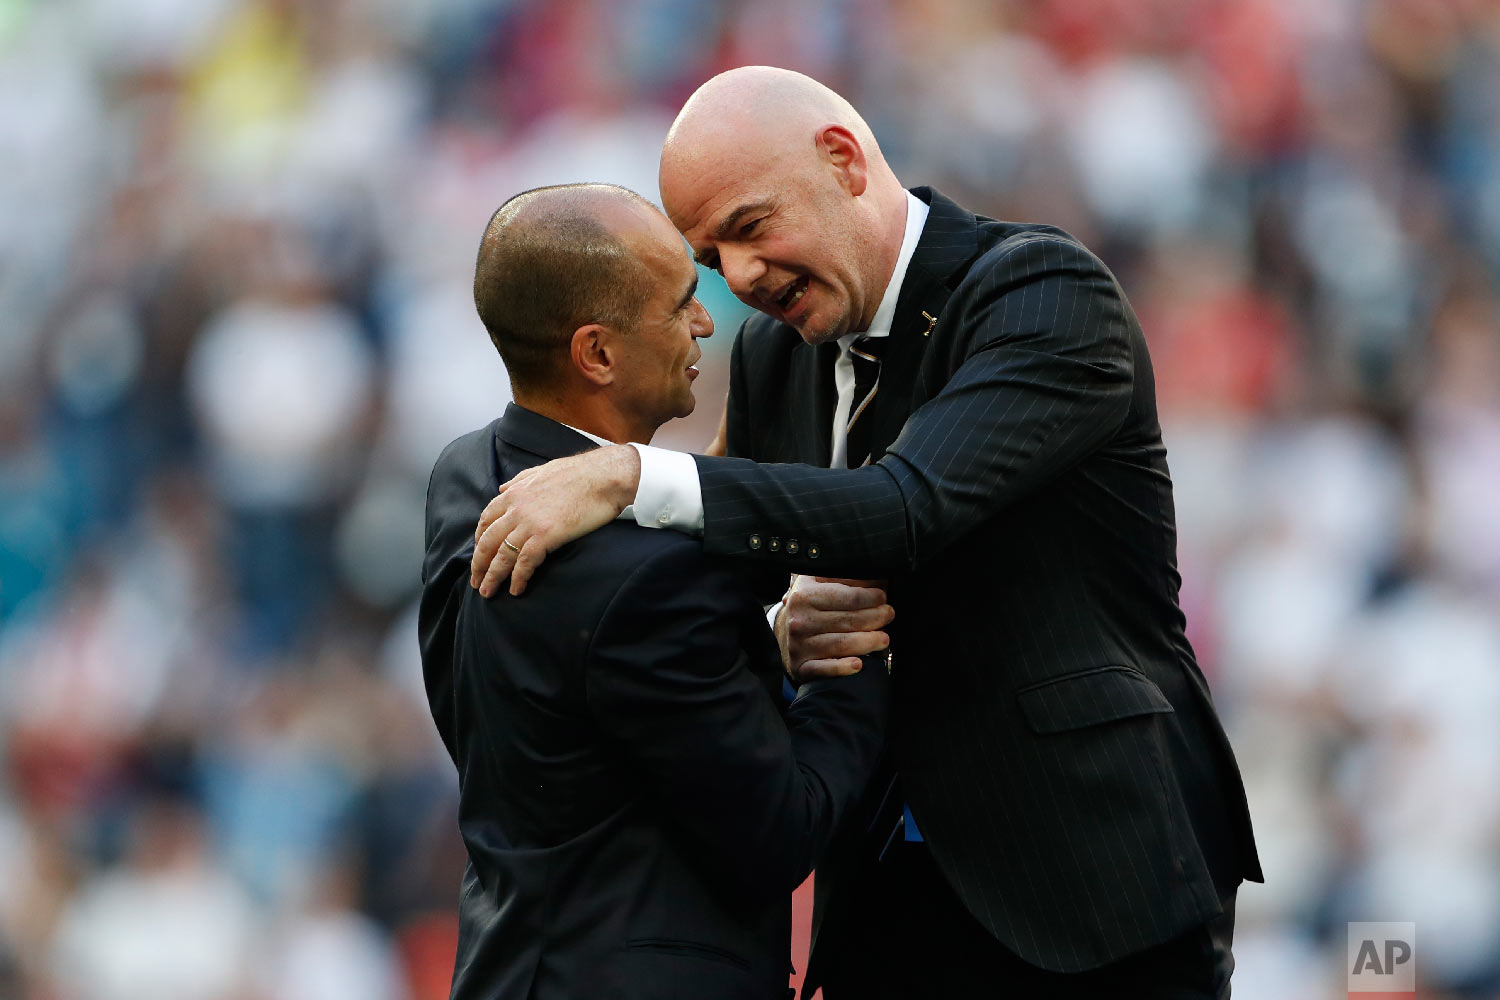  FIFA President Gianni Infantino, right, talks to Belgium coach Roberto Martinez after the third place match between England and Belgium at the 2018 soccer World Cup in the St. Petersburg Stadium in St. Petersburg, Russia, Saturday, July 14, 2018. (A